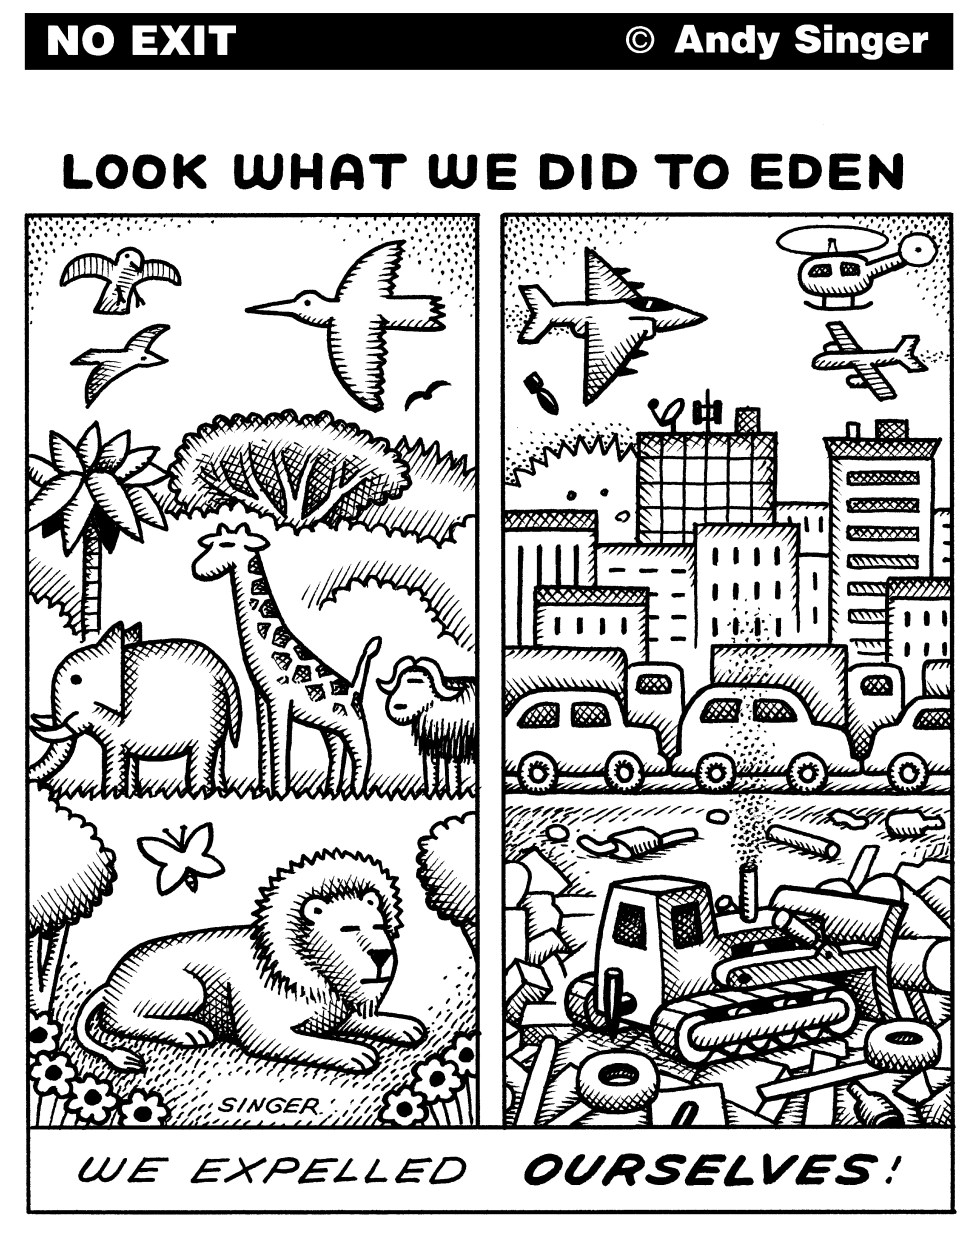 EXPELLED FROM EDEN by Andy Singer